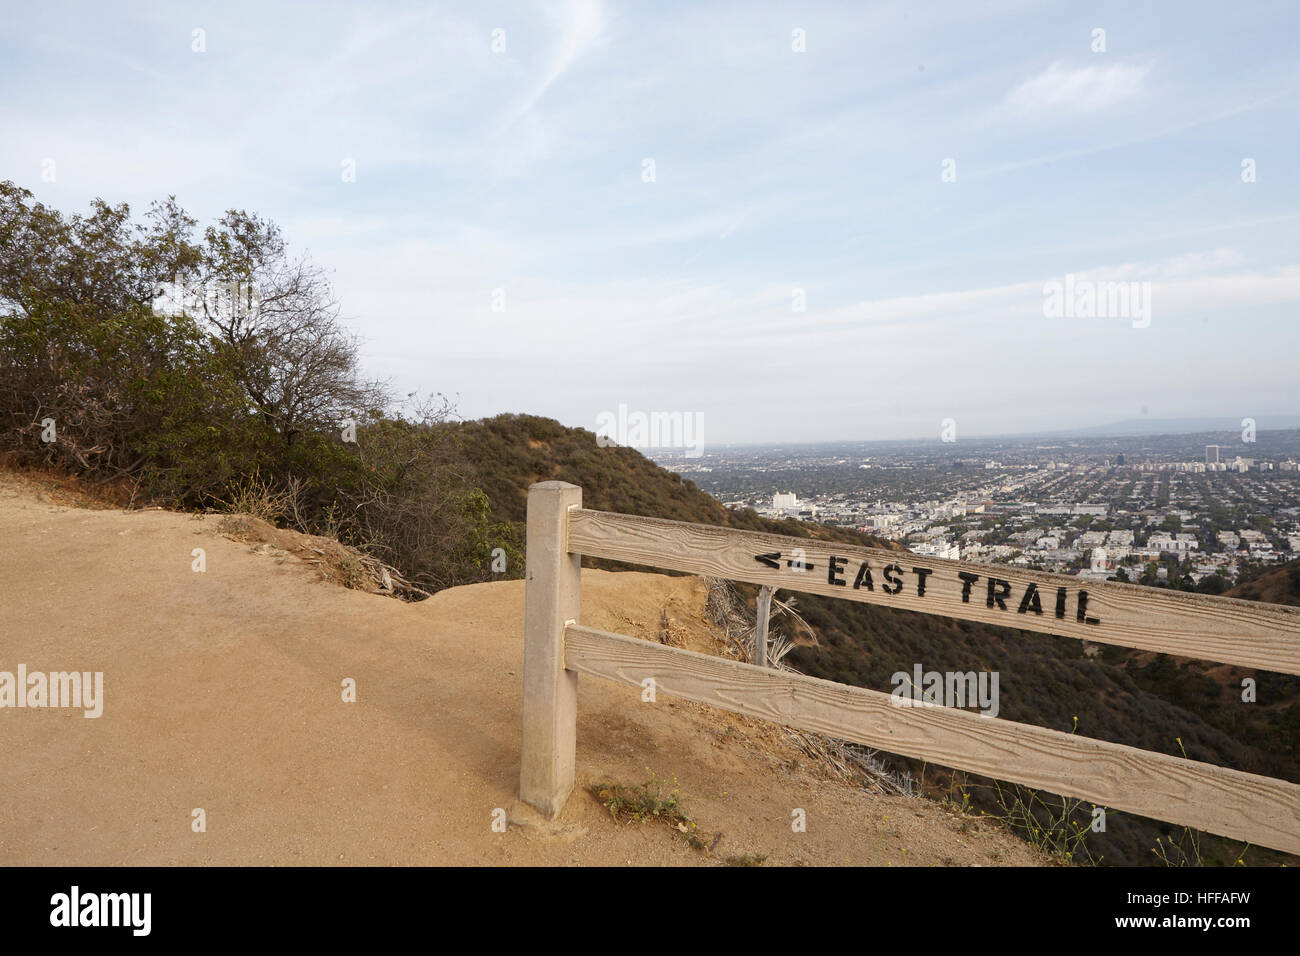 Gangster rapper The Game spotted at Runyon Canyon hiking trail in